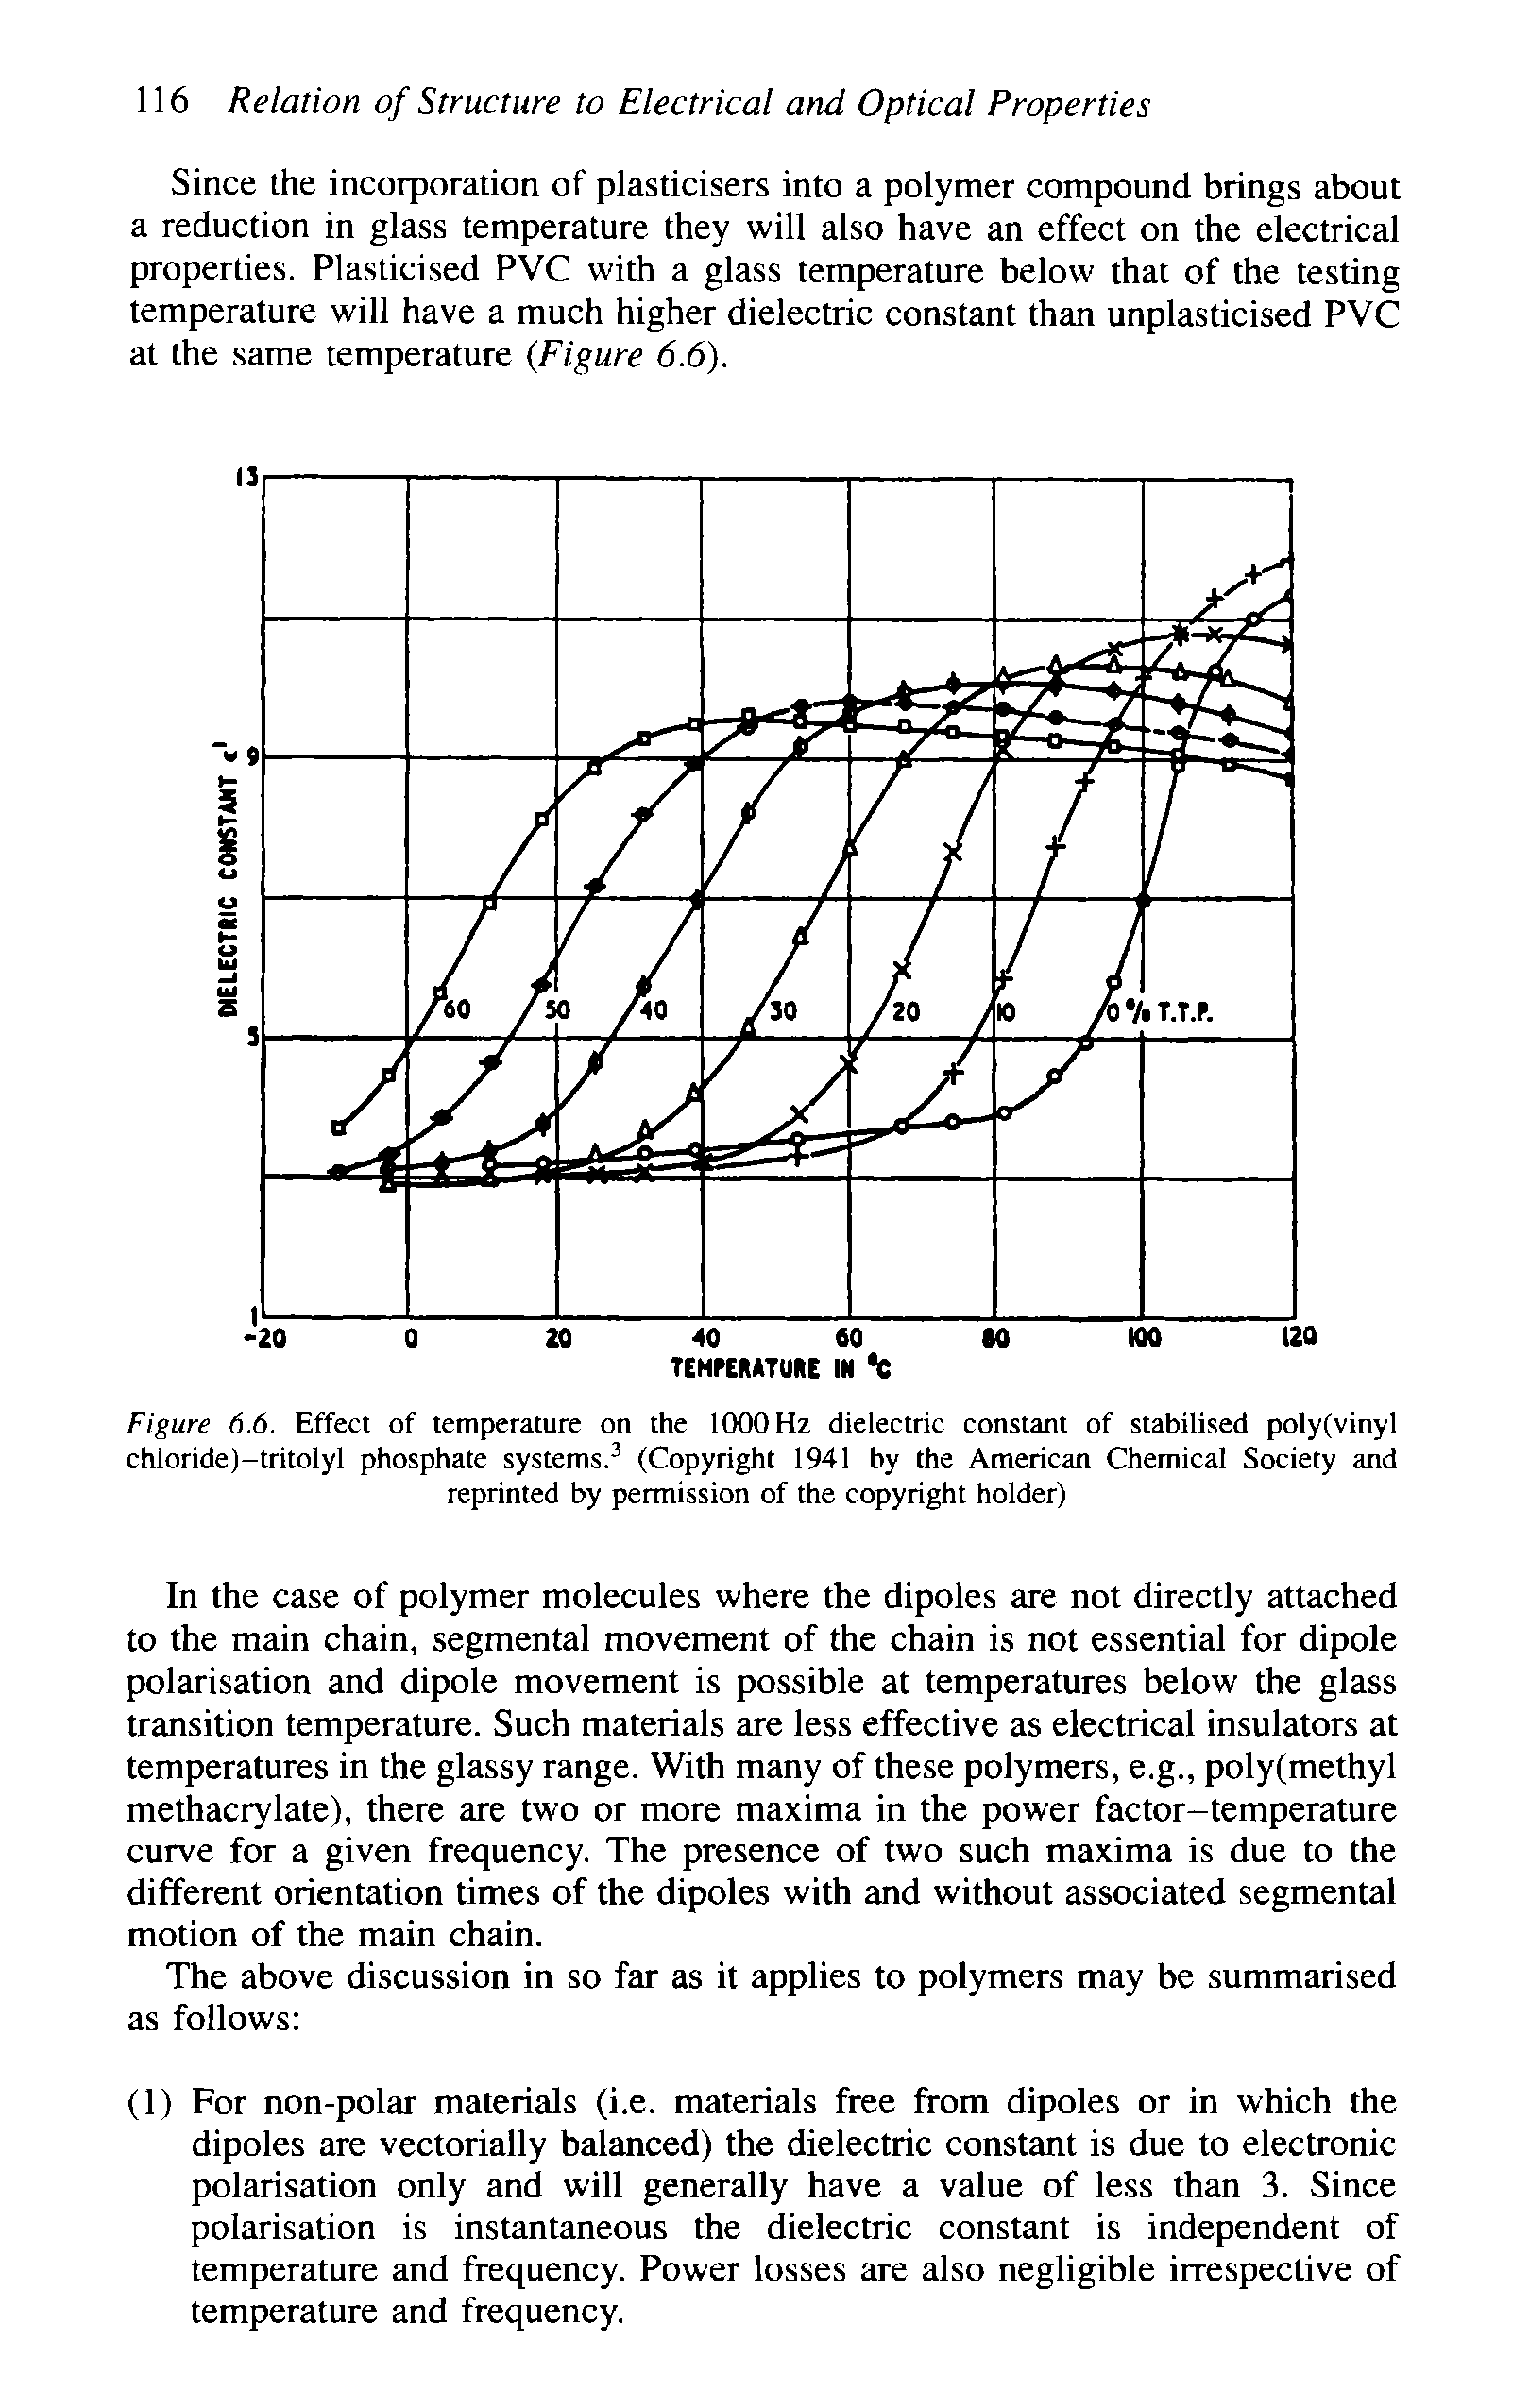 Figure 6.6. Effect of temperature on the 1000 Hz dielectric constant of stabilised polyfvinyl chloridej-tritolyl phosphate systems. (Copyright 1941 by the American Chemical Society and reprinted by permission of the copyright holder)...